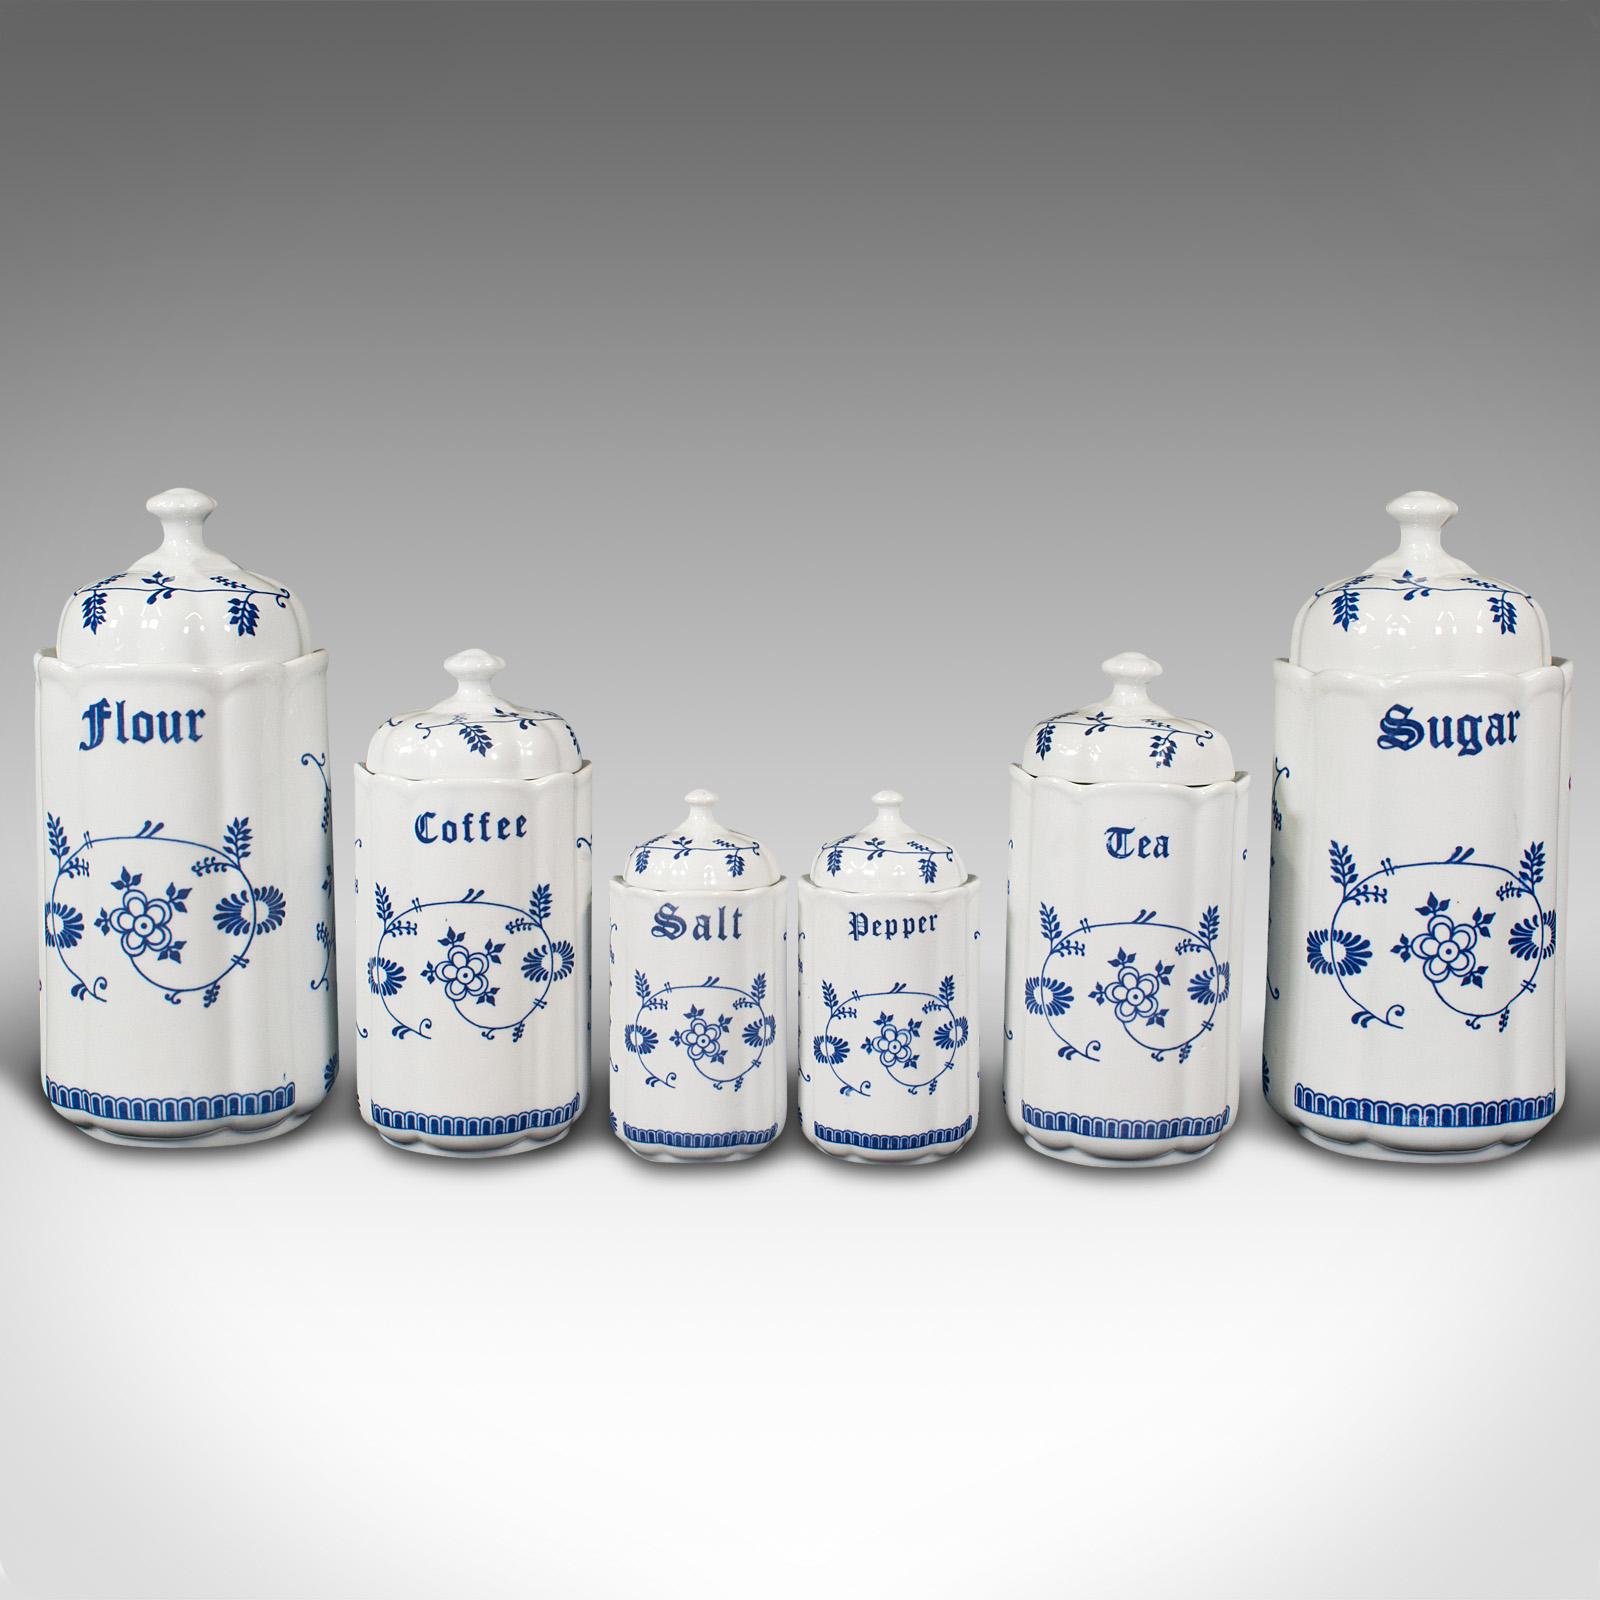 This is a set of 6 vintage storage jars. A German, ceramic kitchen canister with Blue Onion pattern, dating to the mid 20th century, circa 1950.

Charming set of wonderfully useful jars
Displays a desirable aged patina throughout
Bright white